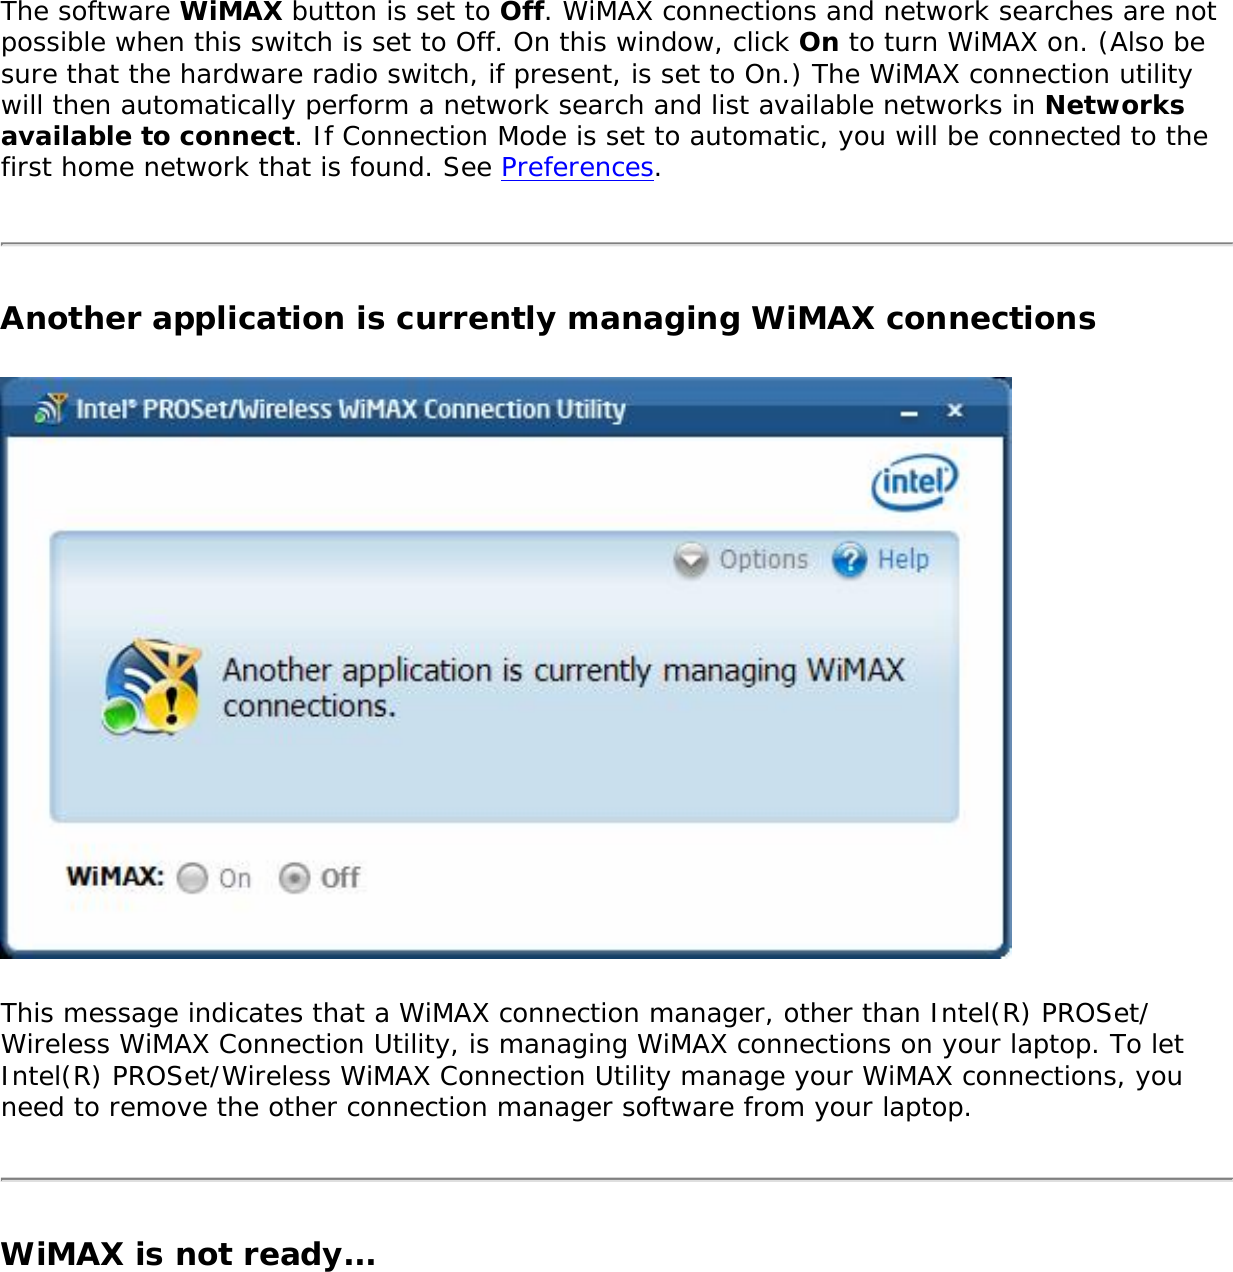 The software WiMAX button is set to Off. WiMAX connections and network searches are not possible when this switch is set to Off. On this window, click On to turn WiMAX on. (Also be sure that the hardware radio switch, if present, is set to On.) The WiMAX connection utility will then automatically perform a network search and list available networks in Networks available to connect. If Connection Mode is set to automatic, you will be connected to the first home network that is found. See Preferences. Another application is currently managing WiMAX connectionsThis message indicates that a WiMAX connection manager, other than Intel(R) PROSet/Wireless WiMAX Connection Utility, is managing WiMAX connections on your laptop. To let Intel(R) PROSet/Wireless WiMAX Connection Utility manage your WiMAX connections, you need to remove the other connection manager software from your laptop. WiMAX is not ready...